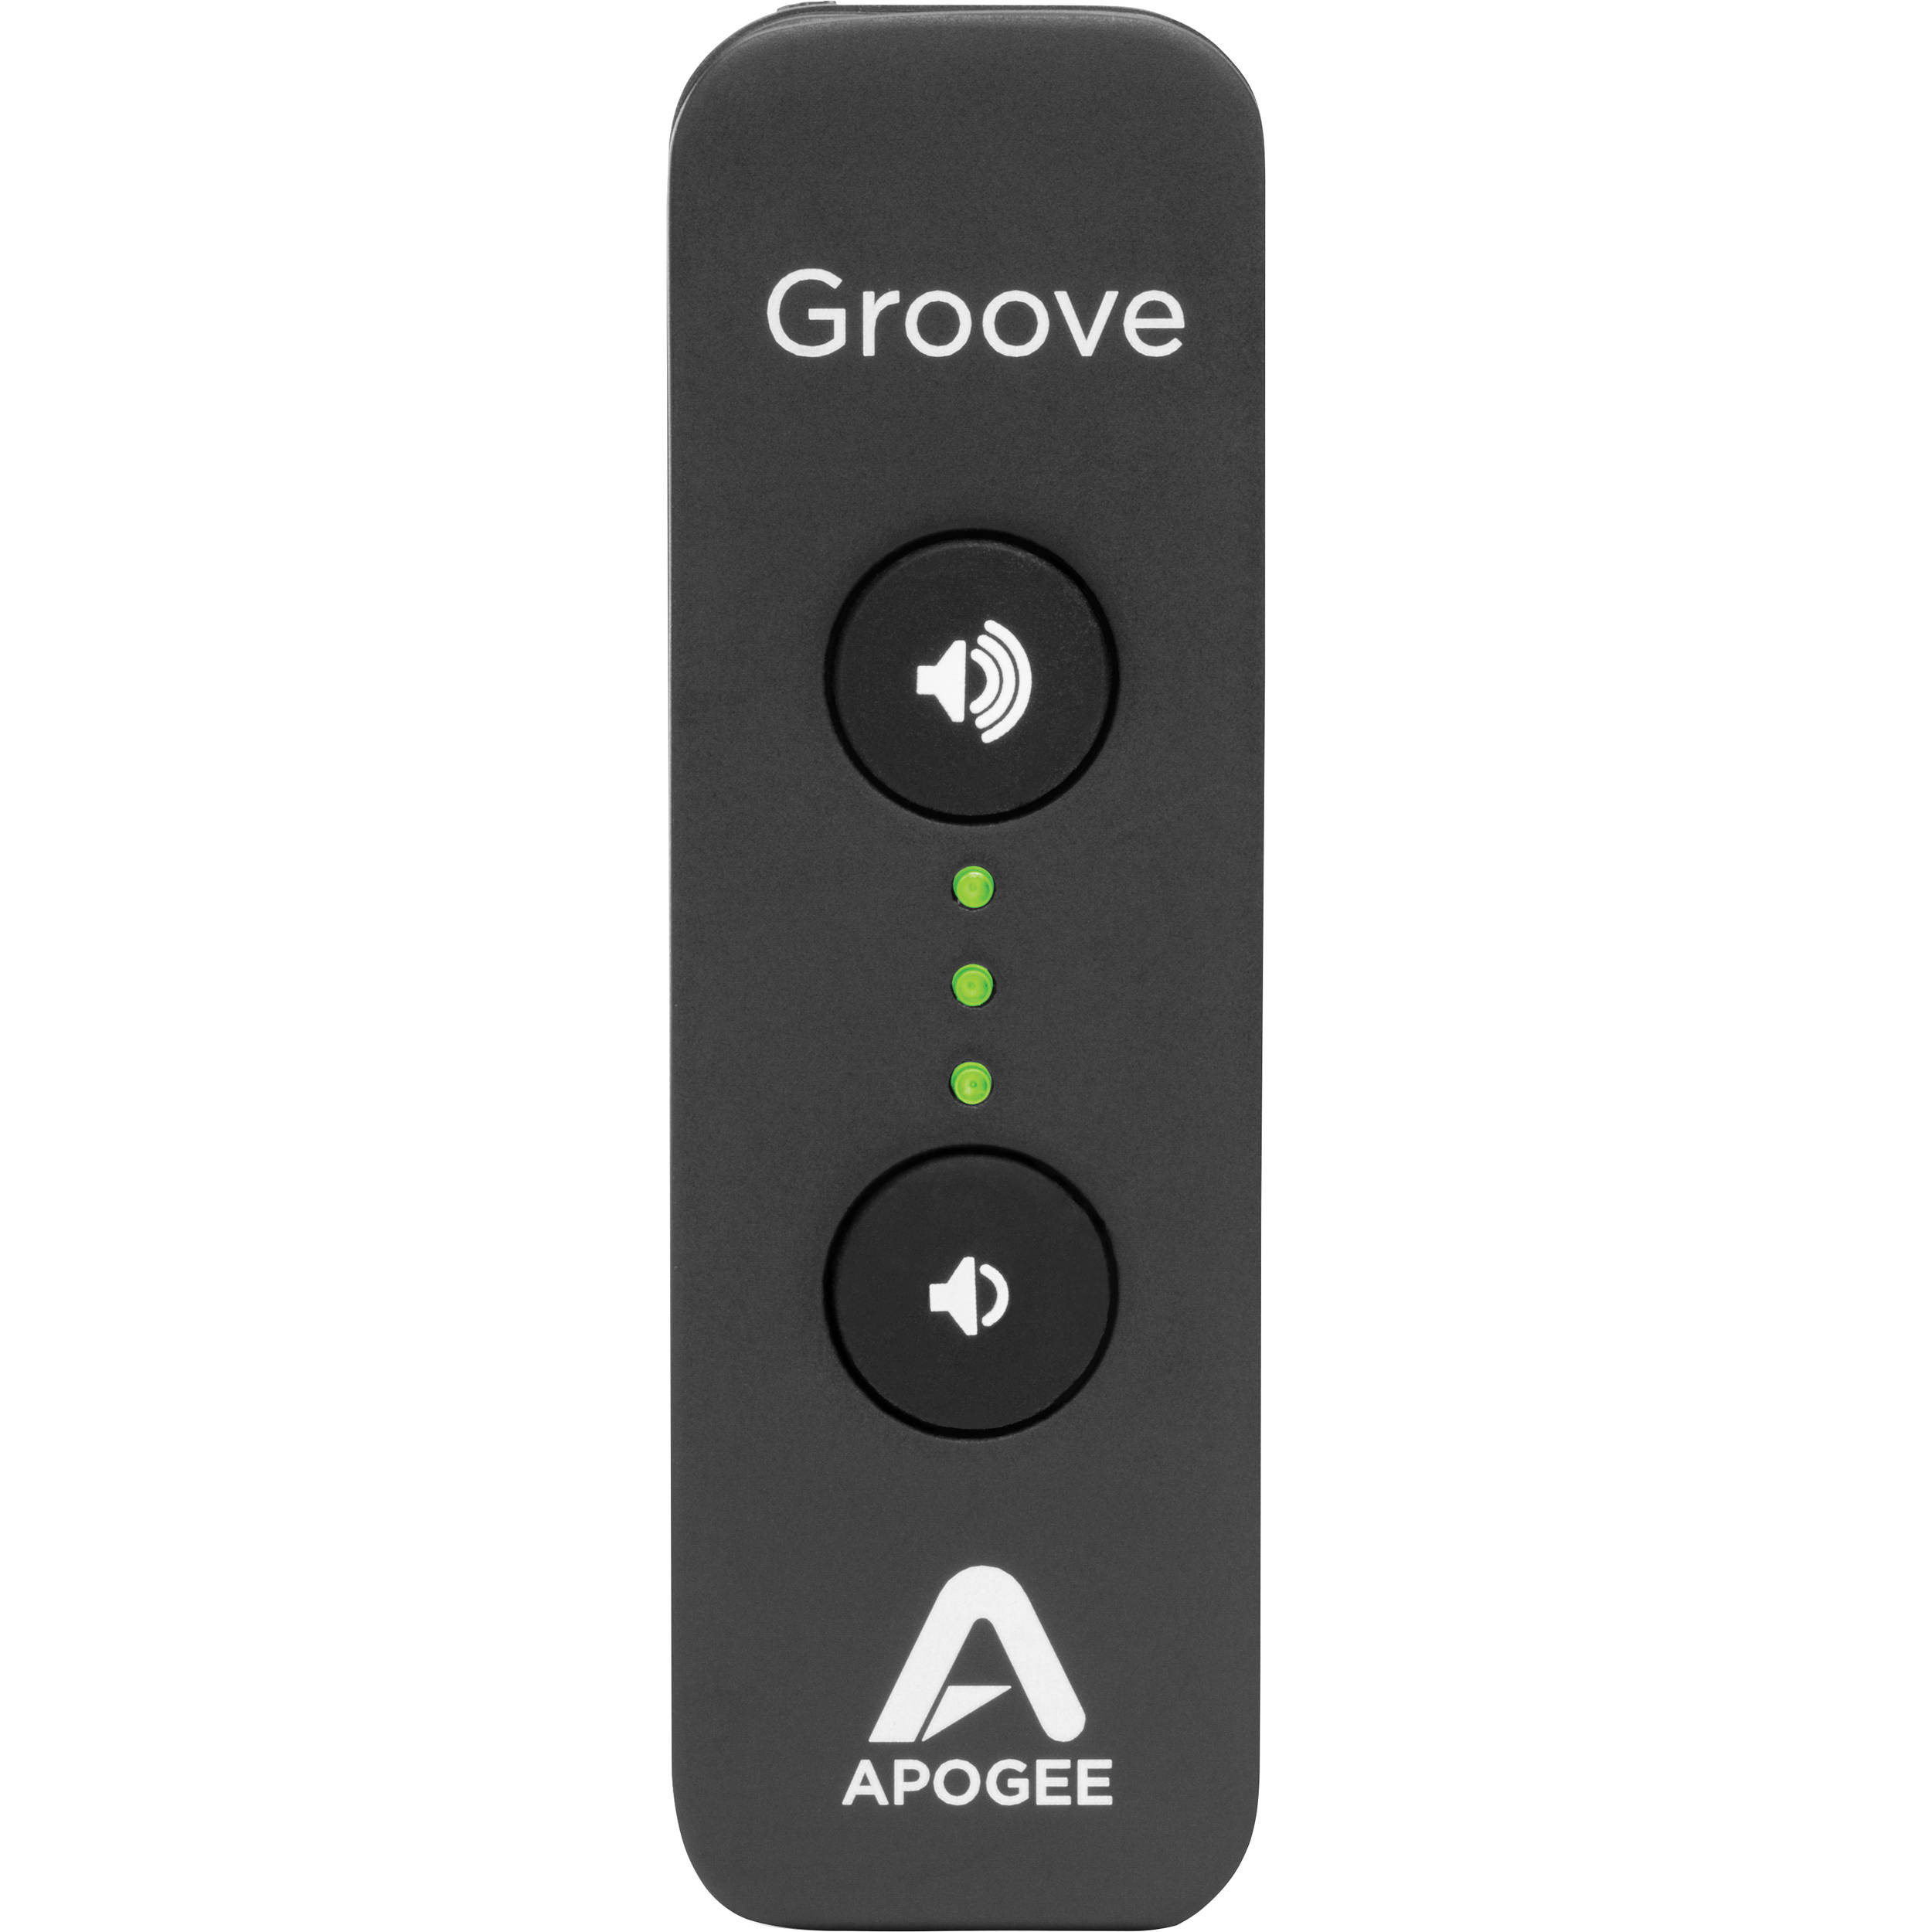 Apogee Electronics Groove - 24-Bit 192 kHz USB DAC and Headphone Amplifier For Mac and PC